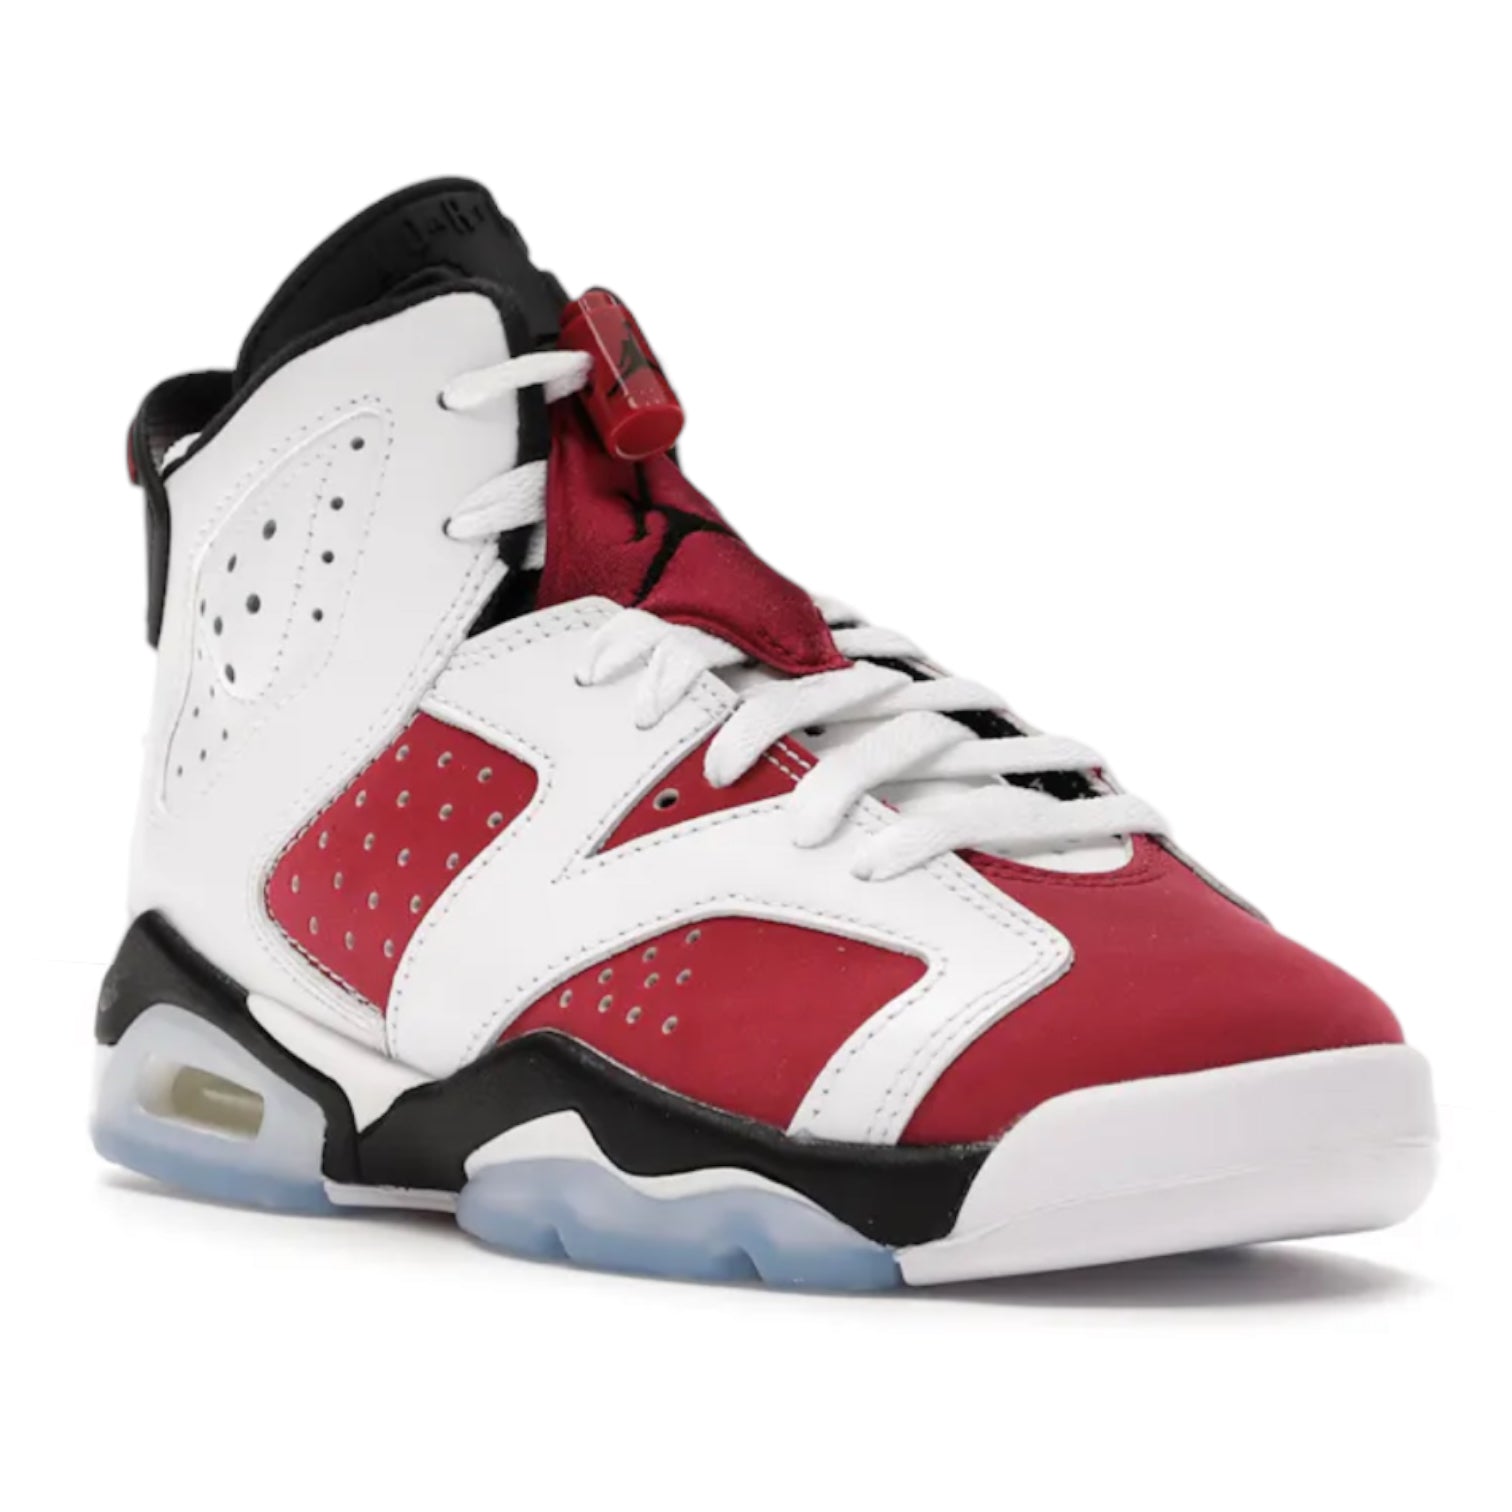 Jordan 6 Carmine - Red and White Sneakers (Steal)